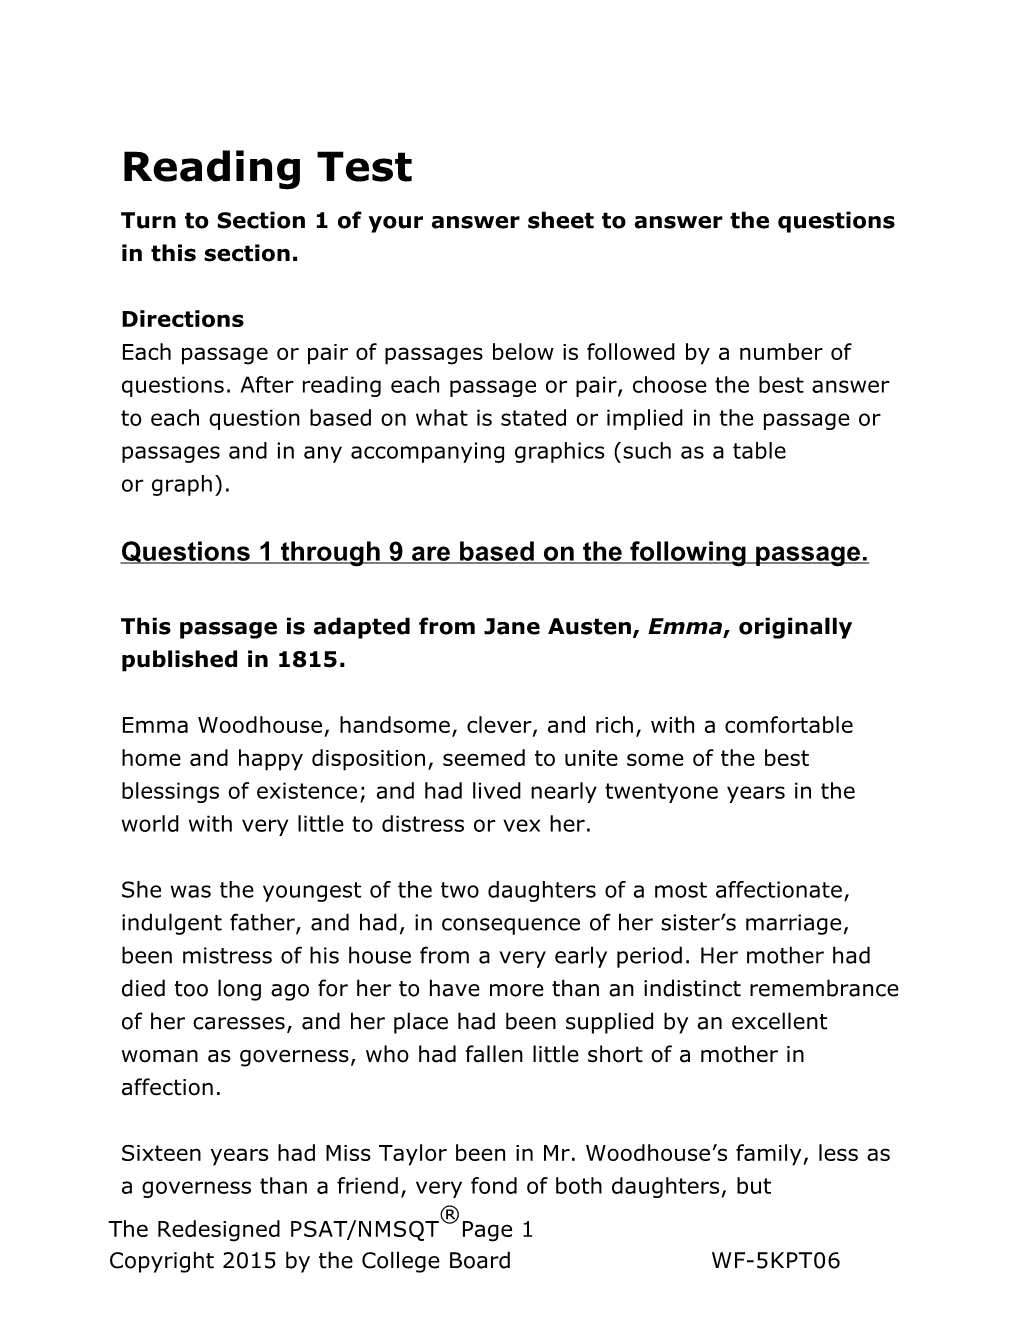 Questions 1 Through 9 Are Based on the Following Passage